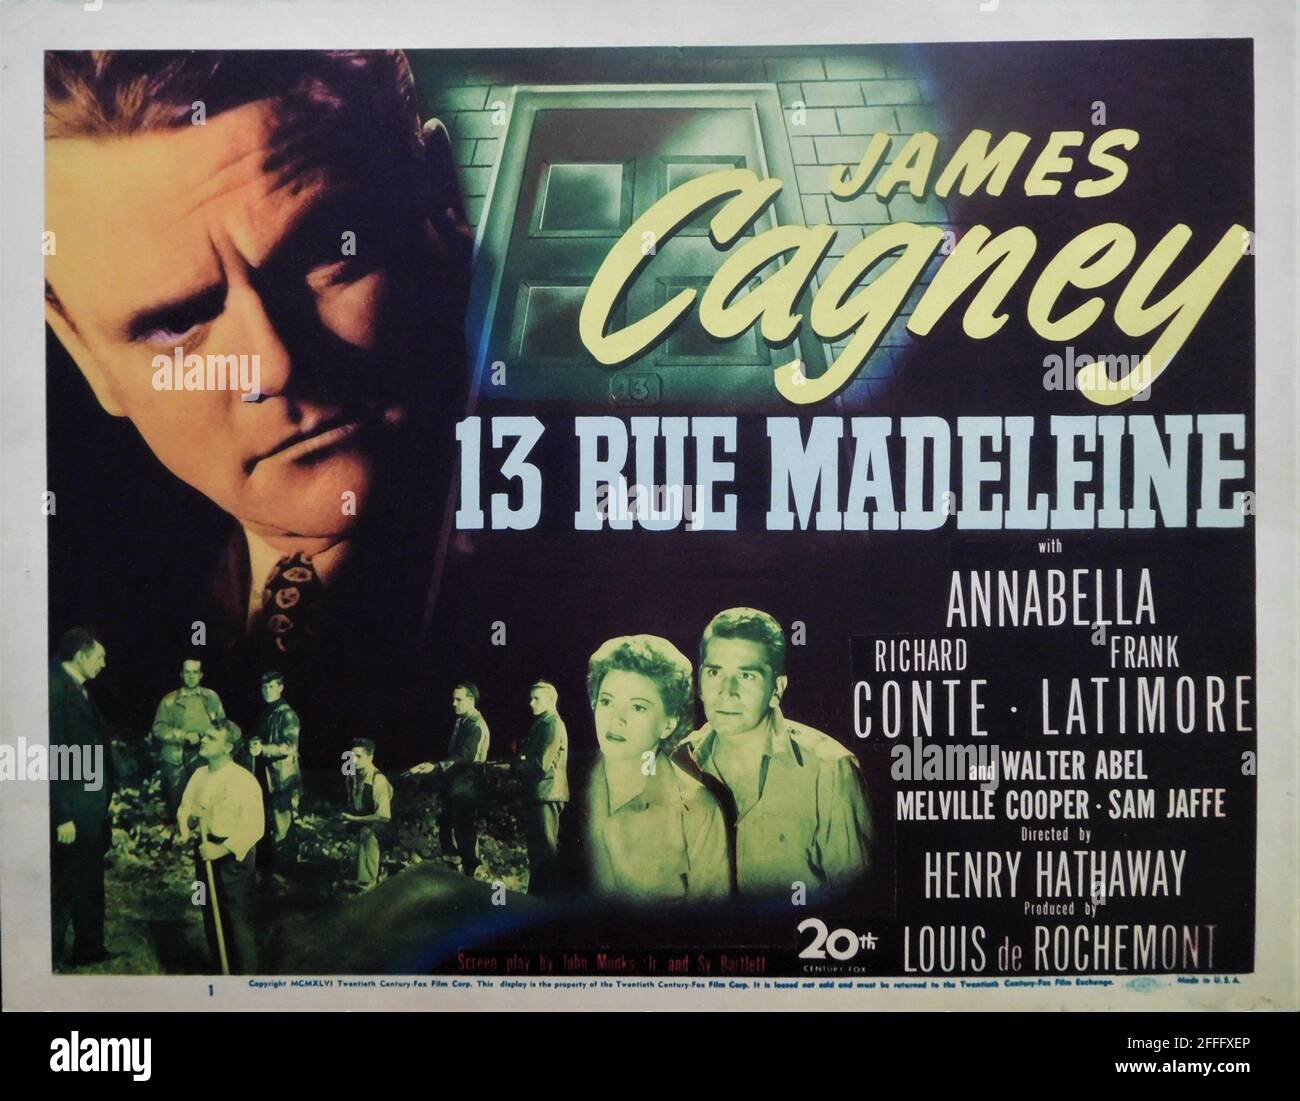 JAMES CAGNEY ANNABELLA and RICHARD CONTE in 13 RUE MADELEINE 1946 director HENRY HATHAWAY original screenplay John Monks Jr and Sy Bartlett producer Louis de Rochemont Twentieth Century Fox Stock Photo